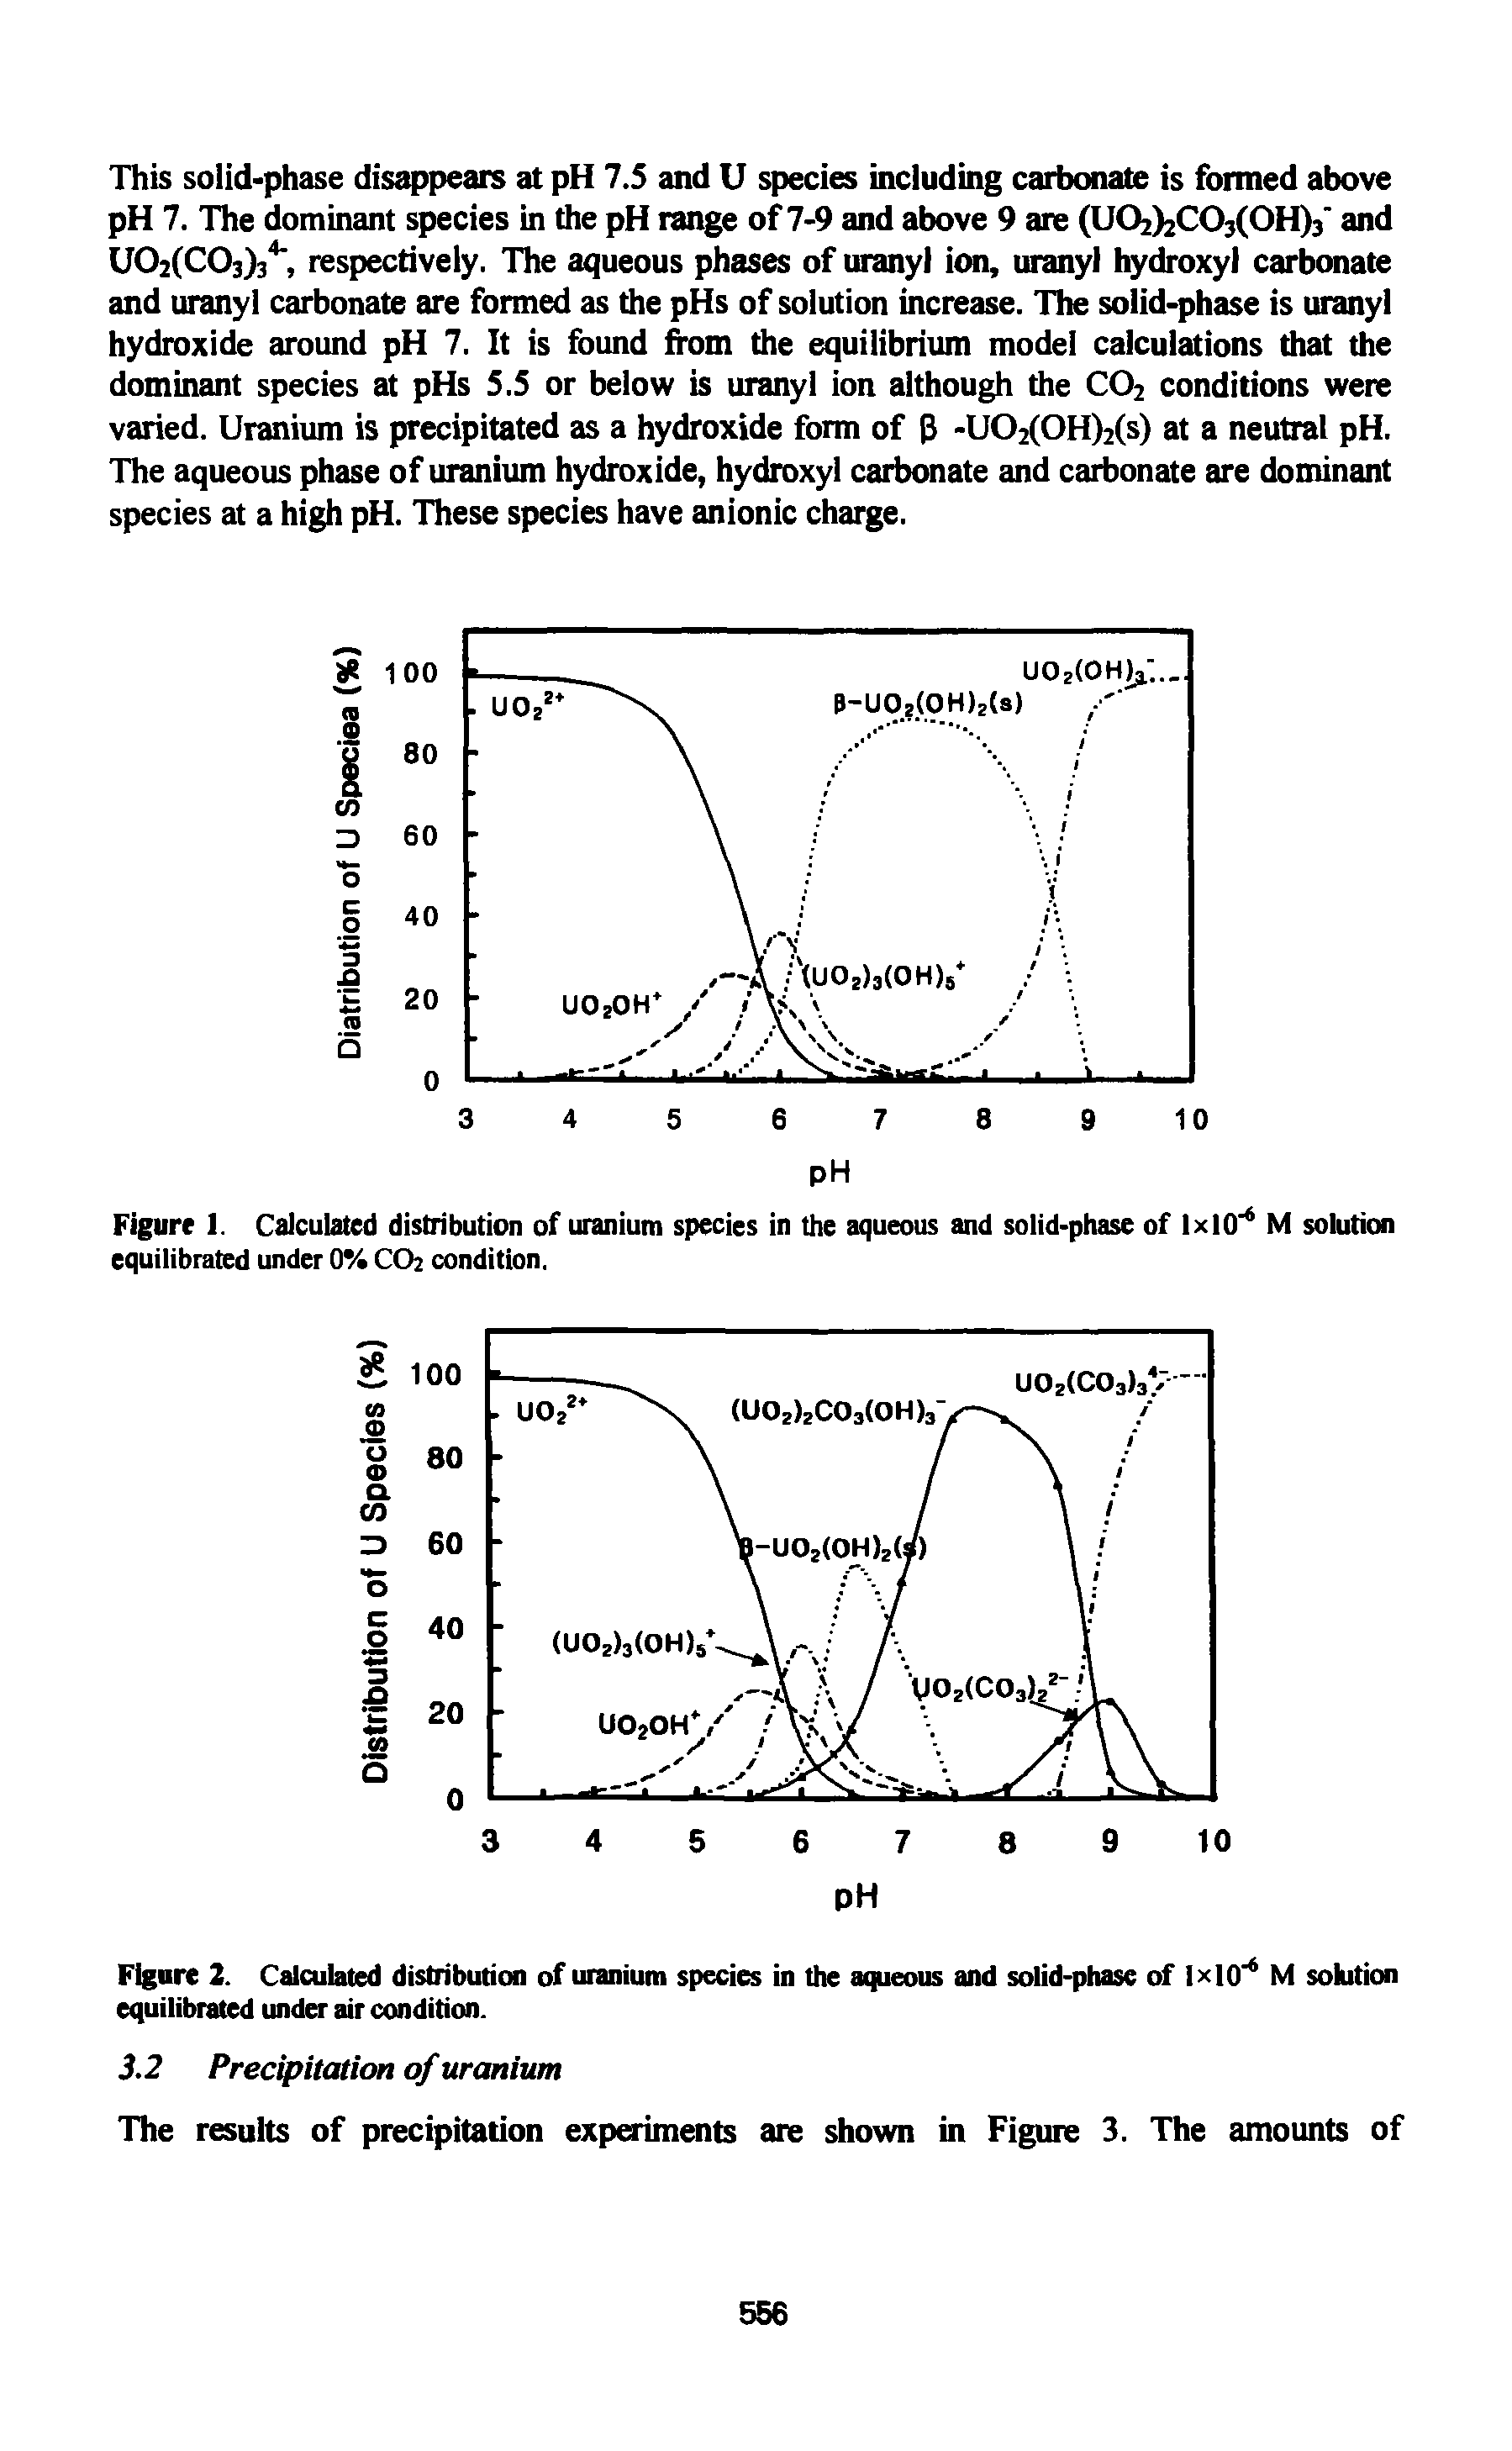 Figure 1. Calculated distribution of uranium species in the aqueous and solid-phase of IxlO M solution equilibrated under 0% CO2 condition.